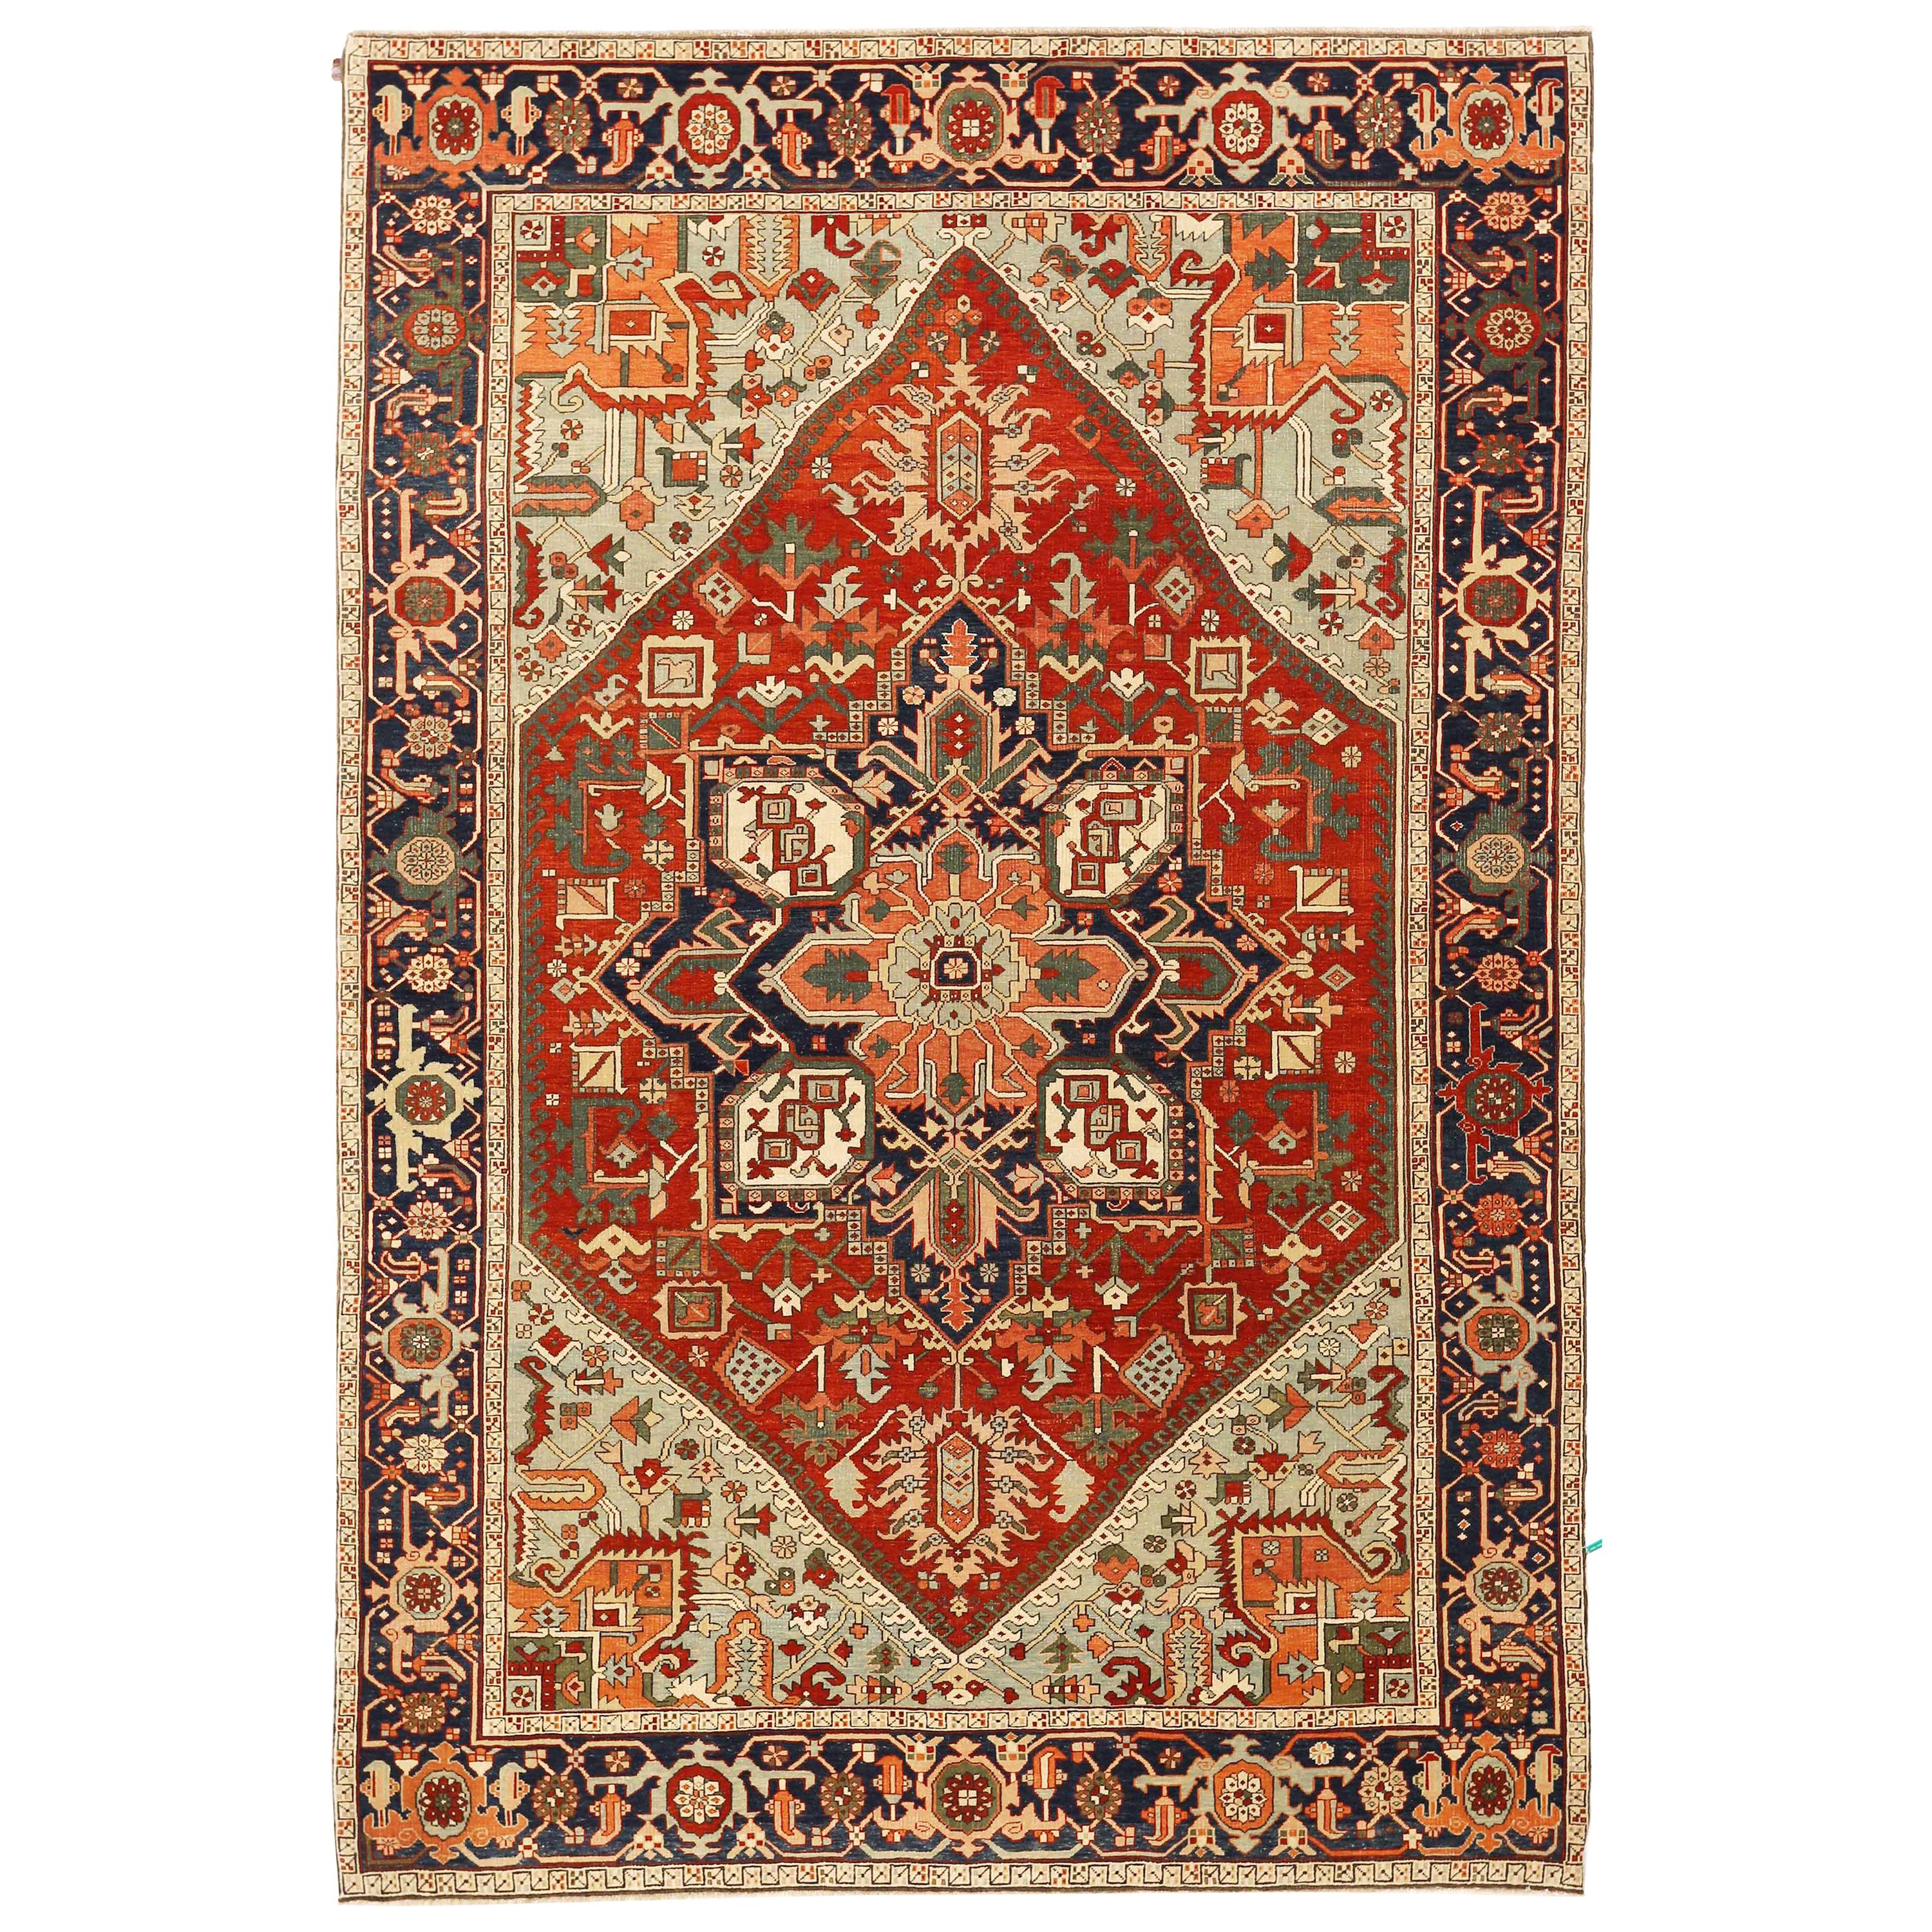 Contemporary Turkish Serapi Rug with Black and Red Botanical Details